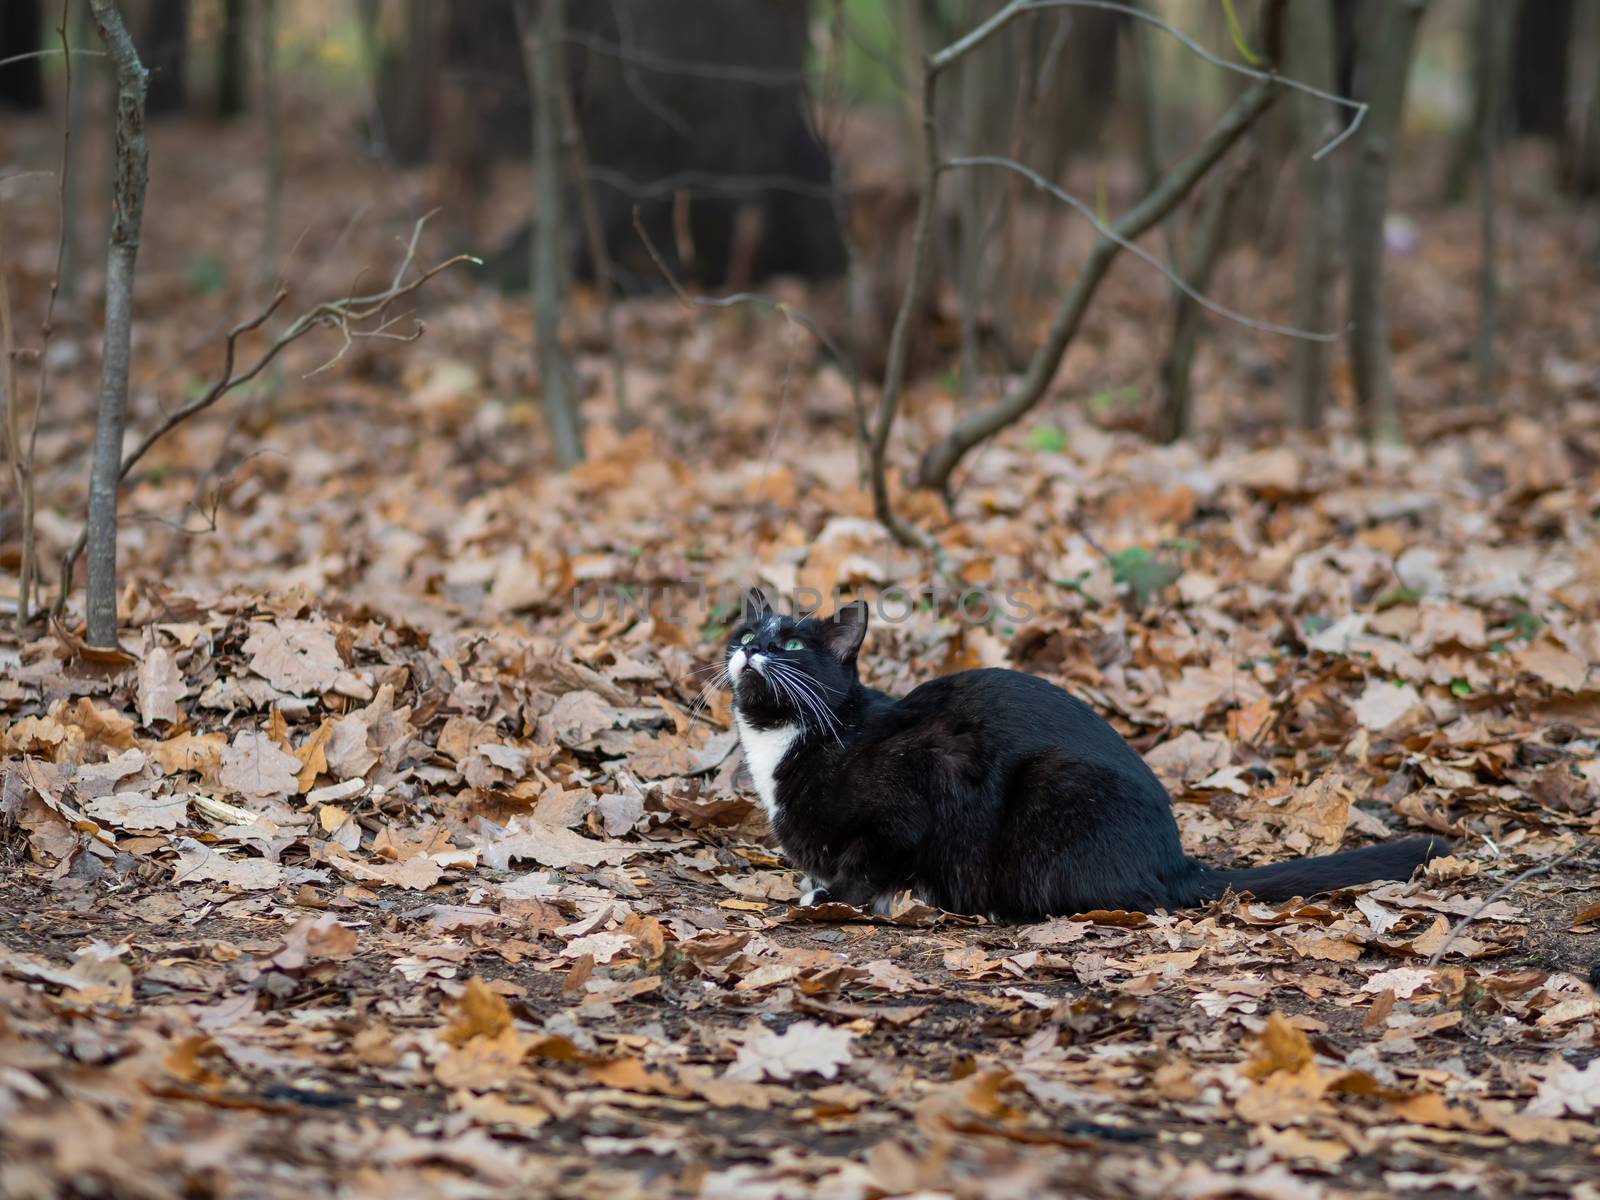 Fluffy black cat with white spots walking in park. Stray animal in forest.